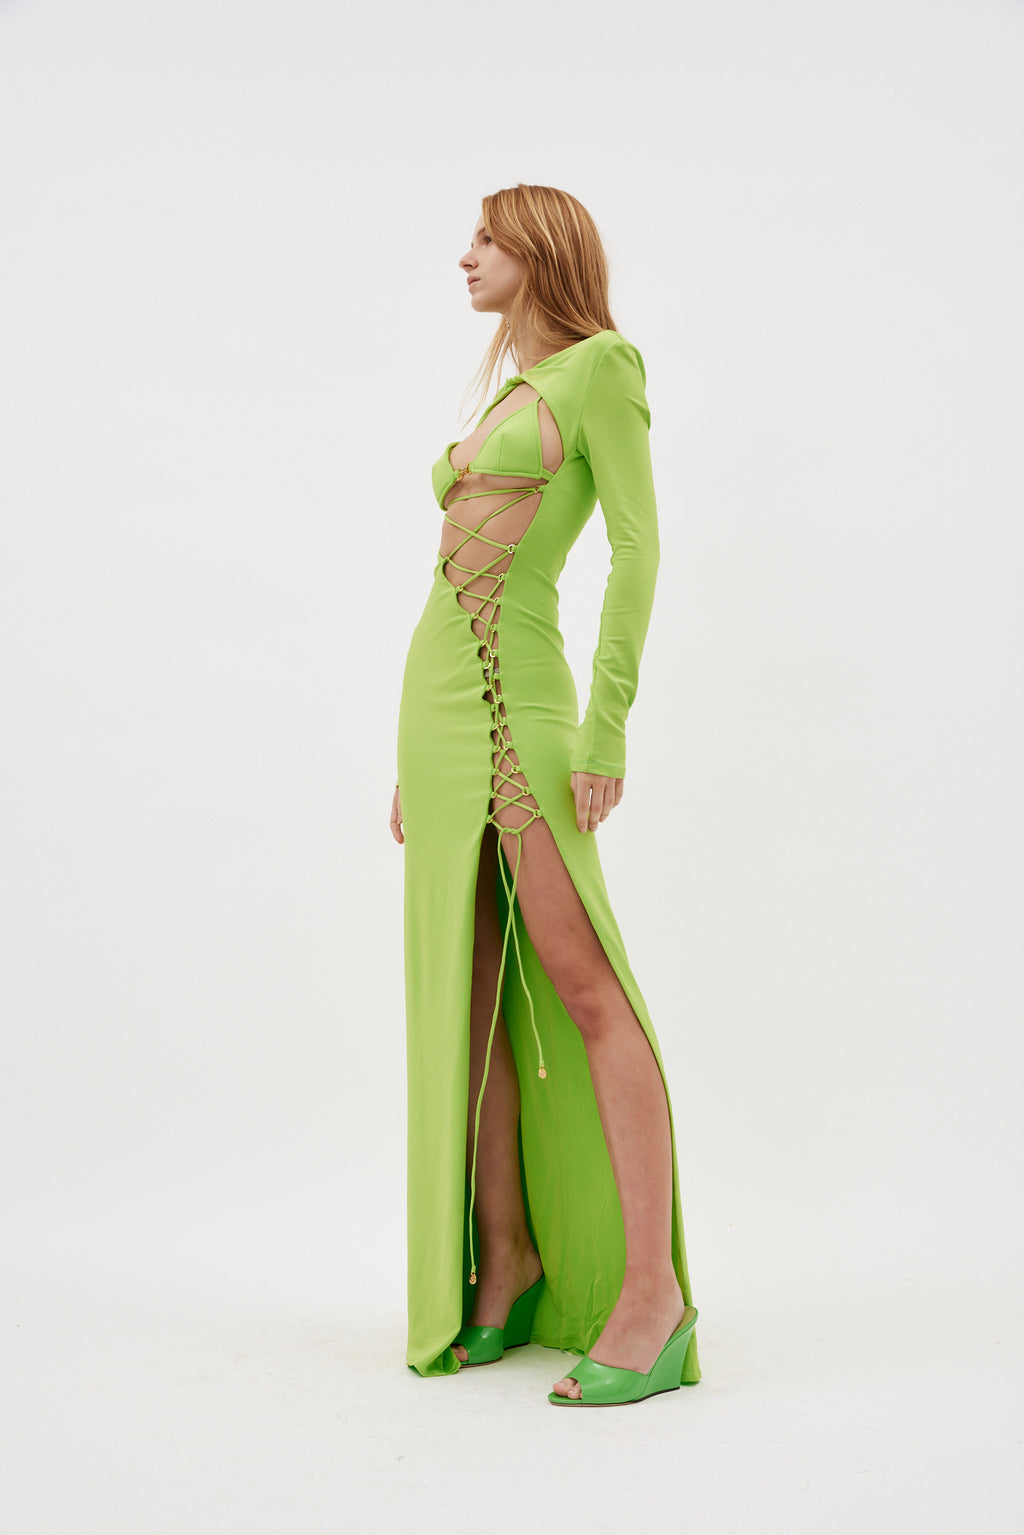 Coco Lime Green Evening Dress